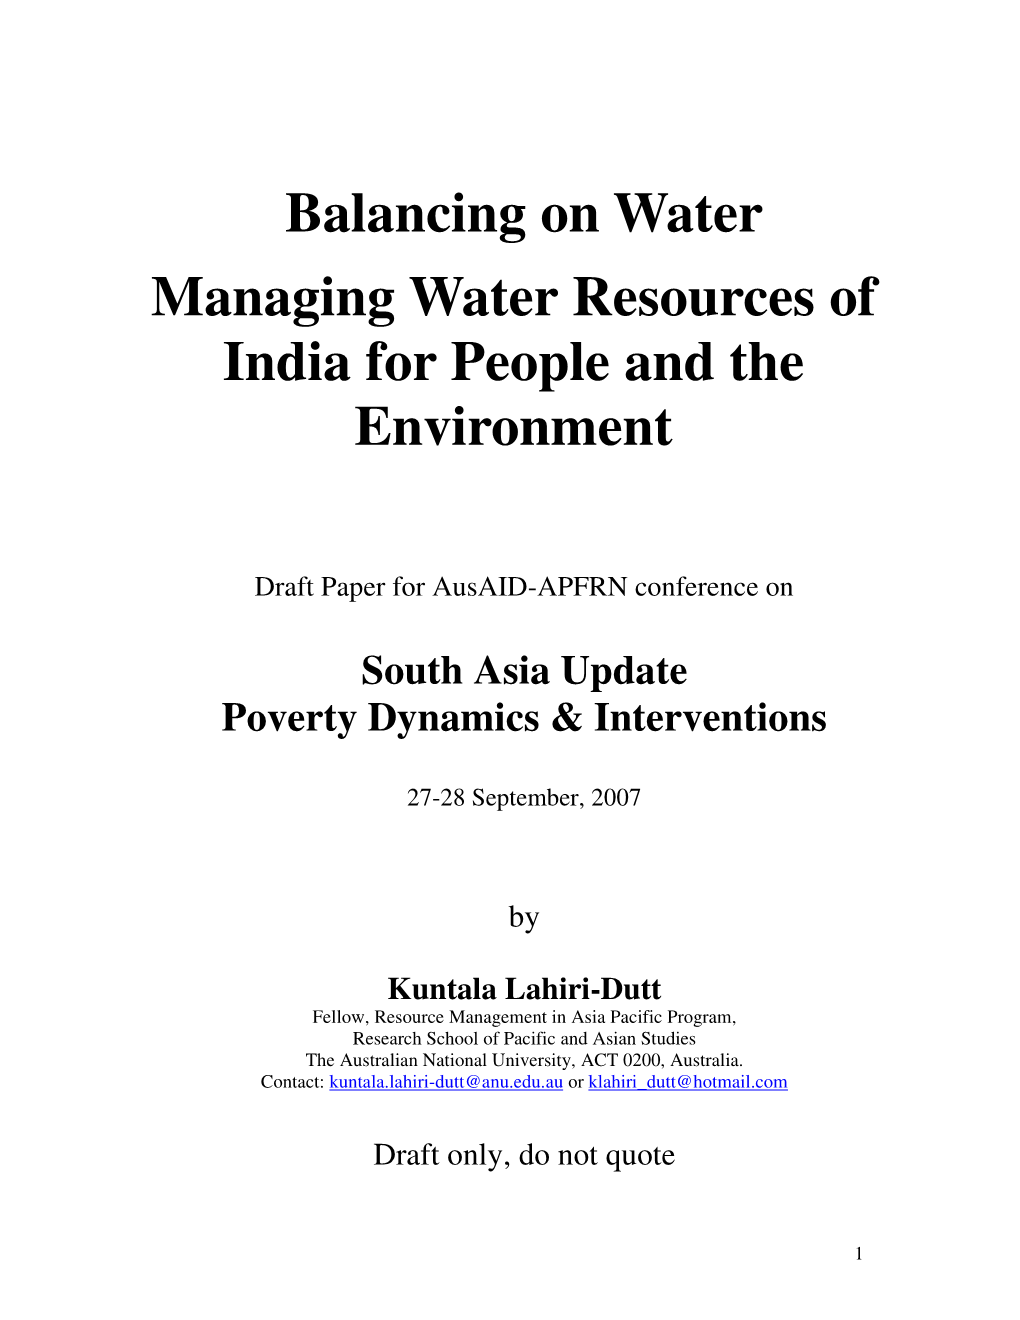 Balancing on Water Managing Water Resources of India for People and the Environment